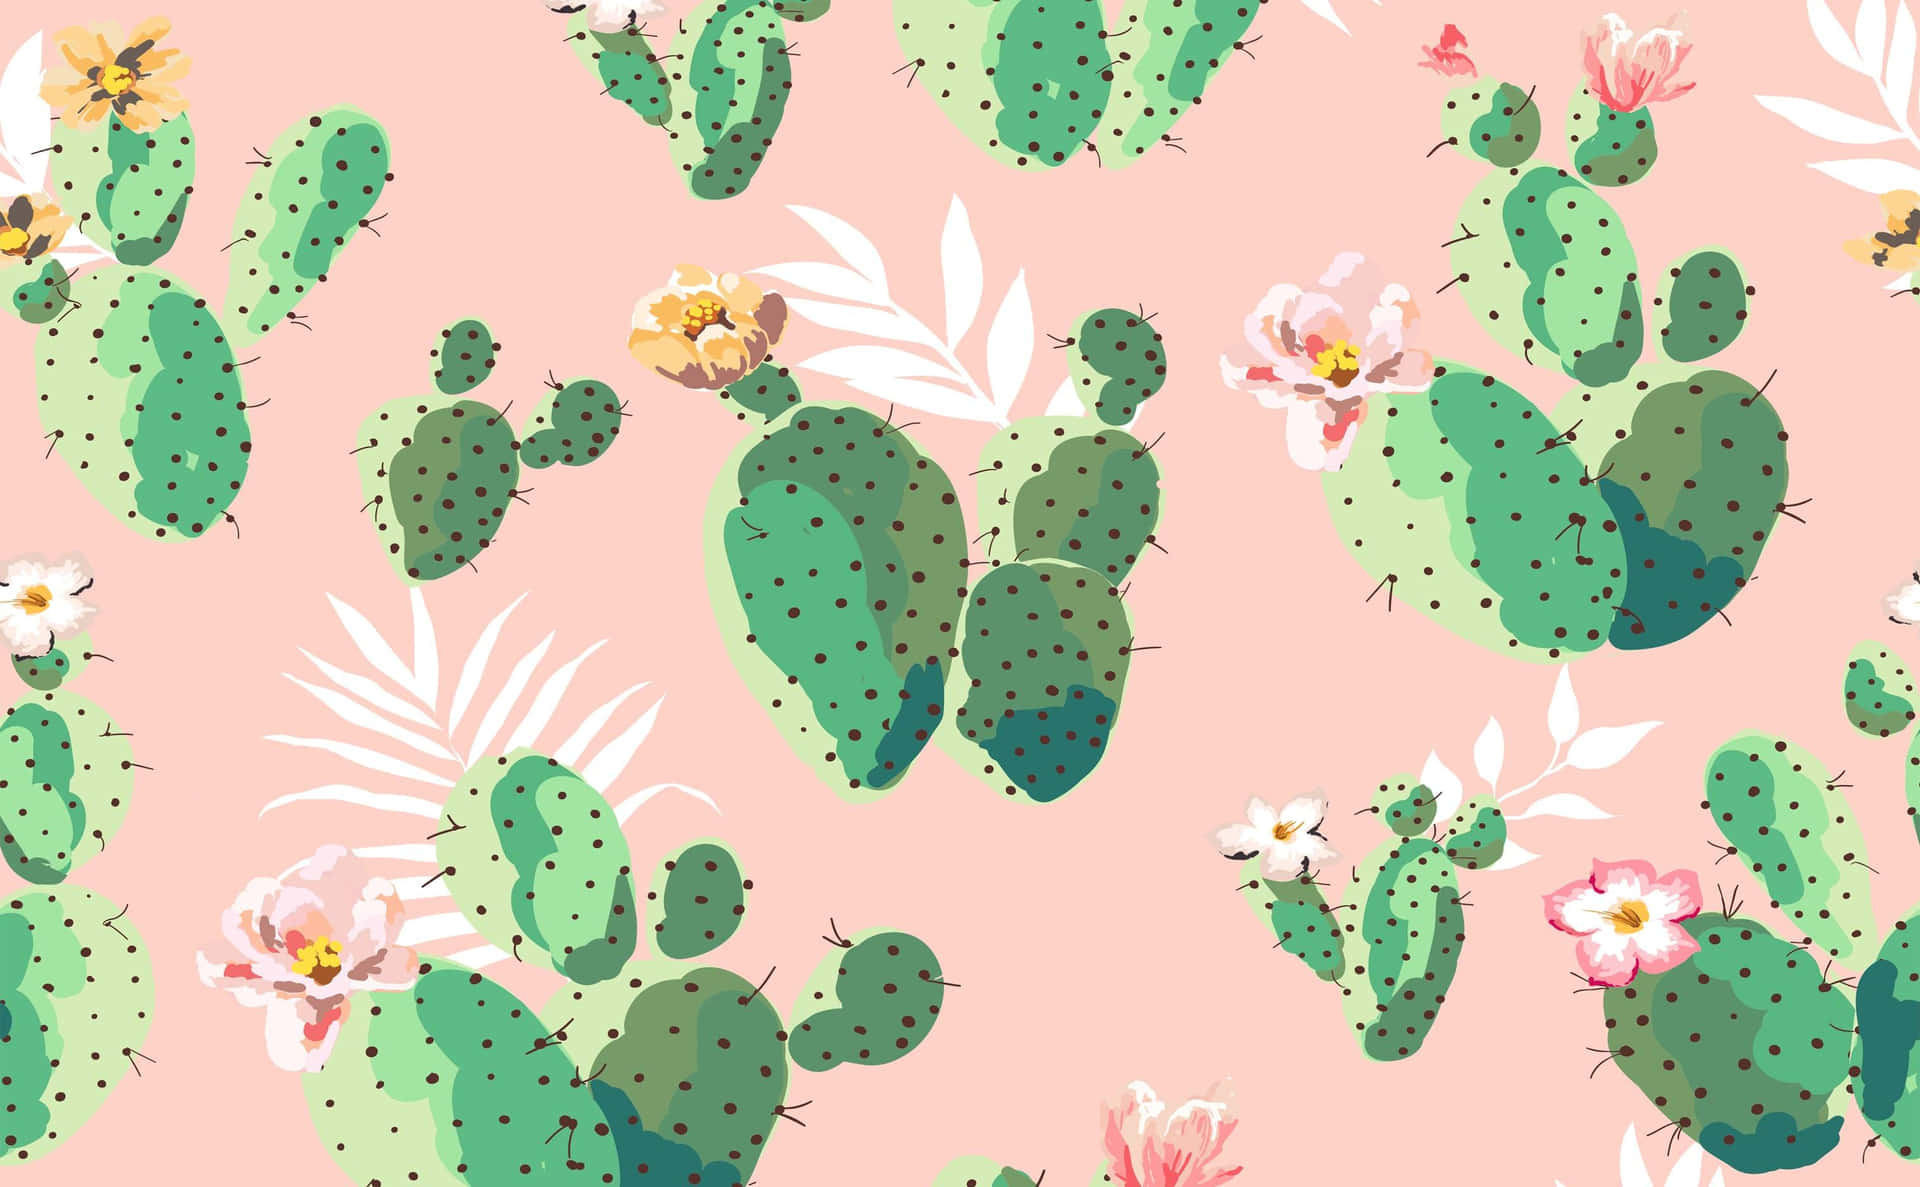 Cactus Wallpaper Discover more Aesthetic Background Cute Desktop Iphone  wallpapers httpswwwenjpgcomcac  Wallpaper Cactus backgrounds  Iphone wallpaper